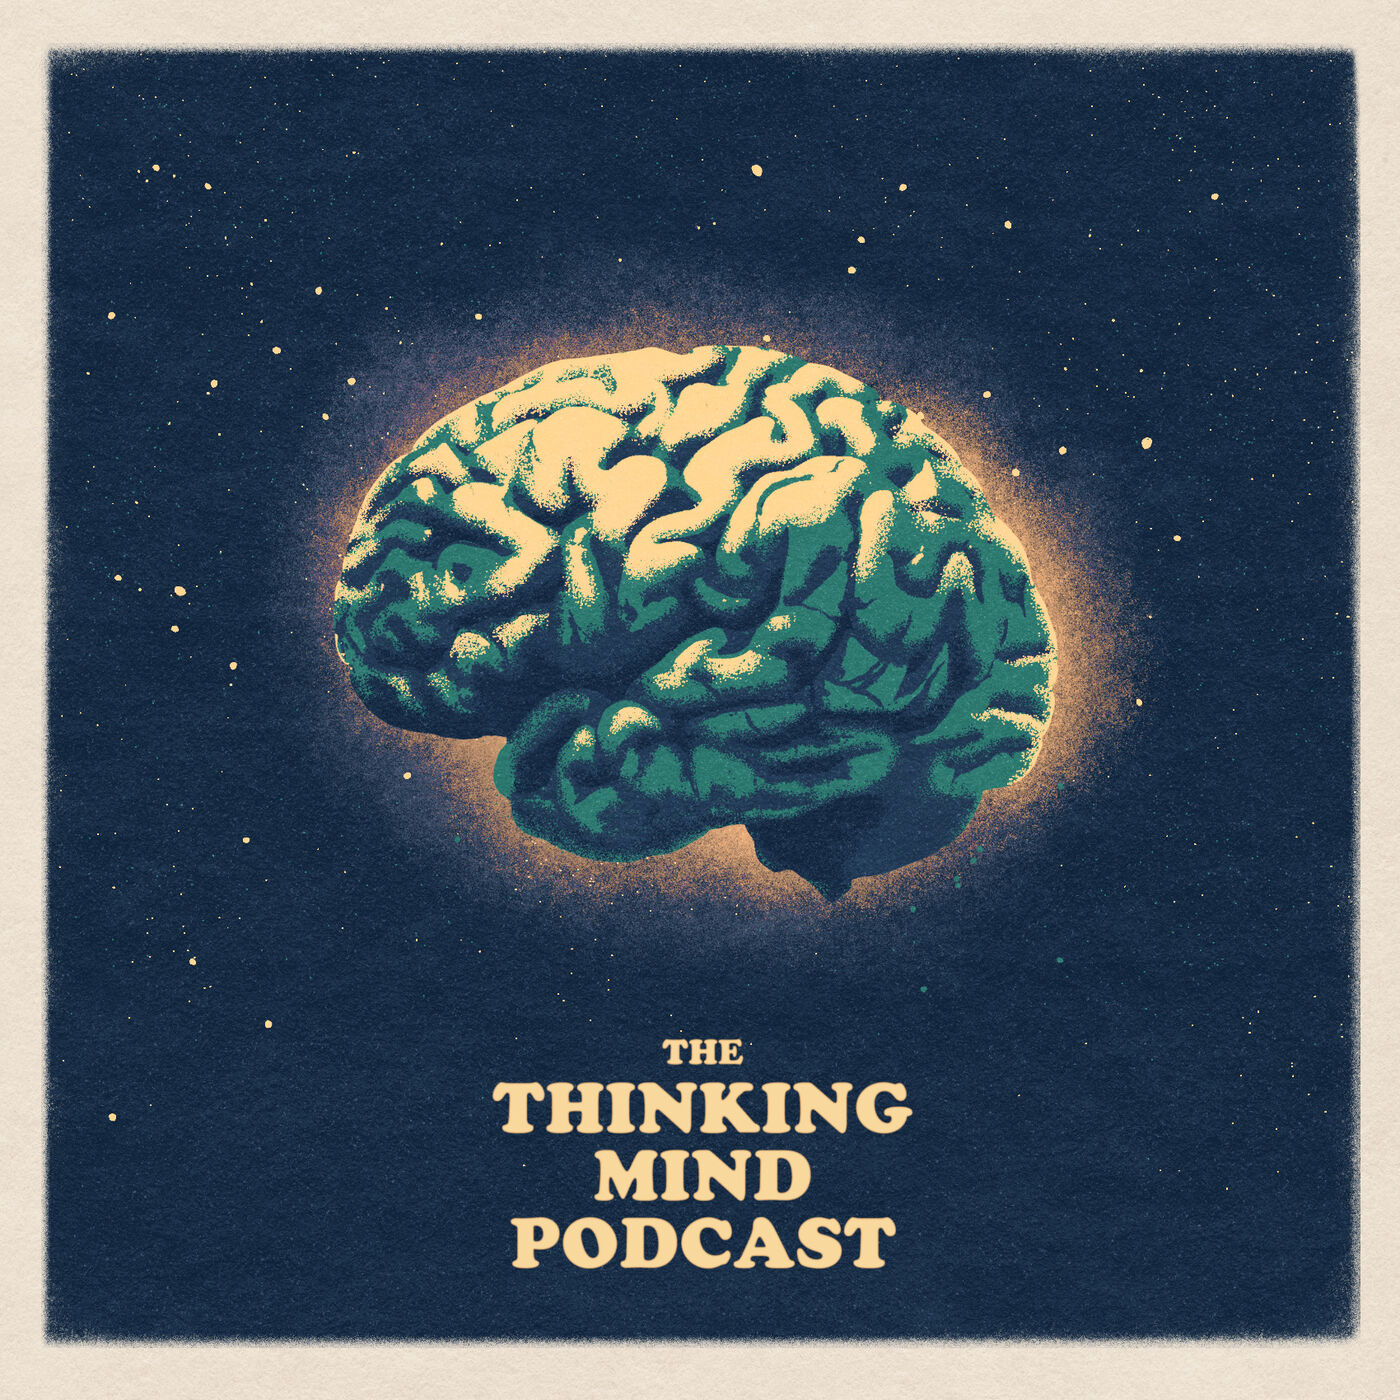 Kitty speaks with Dr. Rebecca Wilkinson on The Thinking Mind Podcast